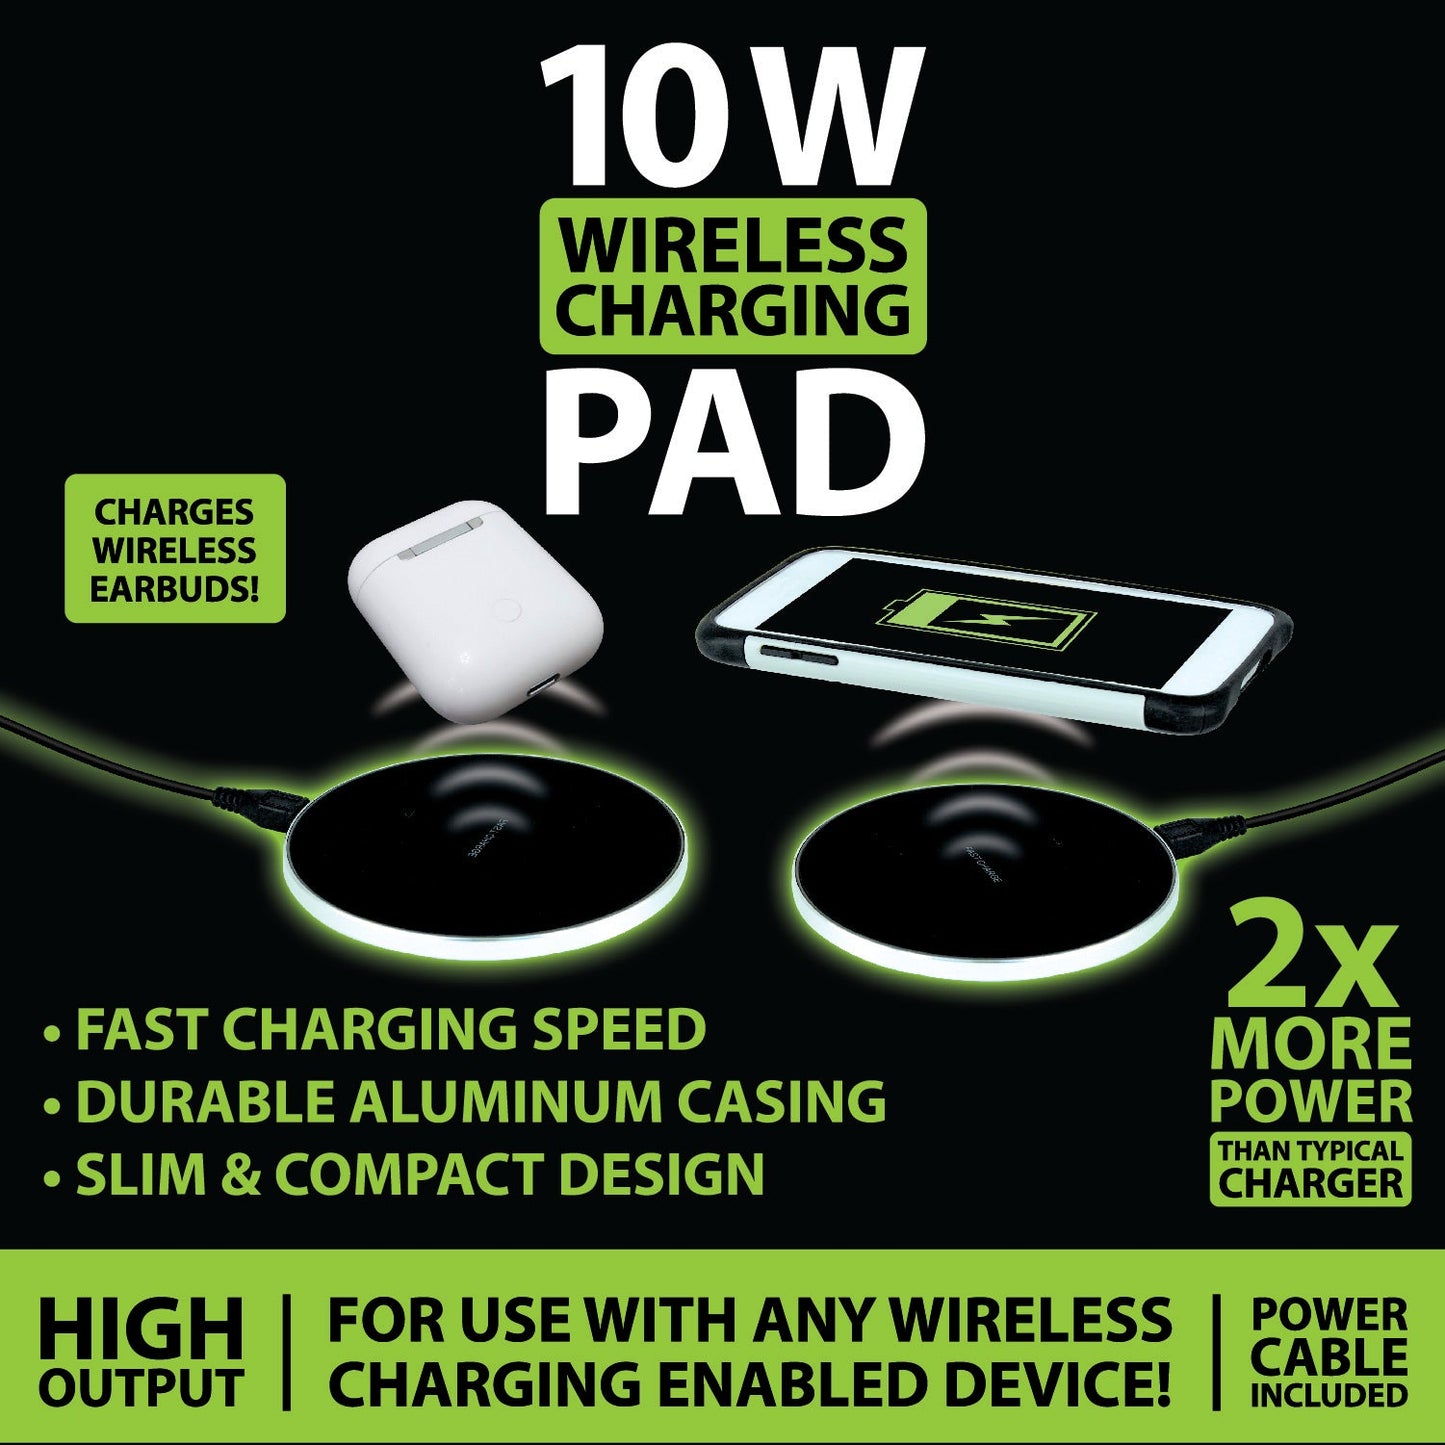 ITEM NUMBER 021784 10W WIRELESS CHARGER 6 PIECES PER DISPLAY